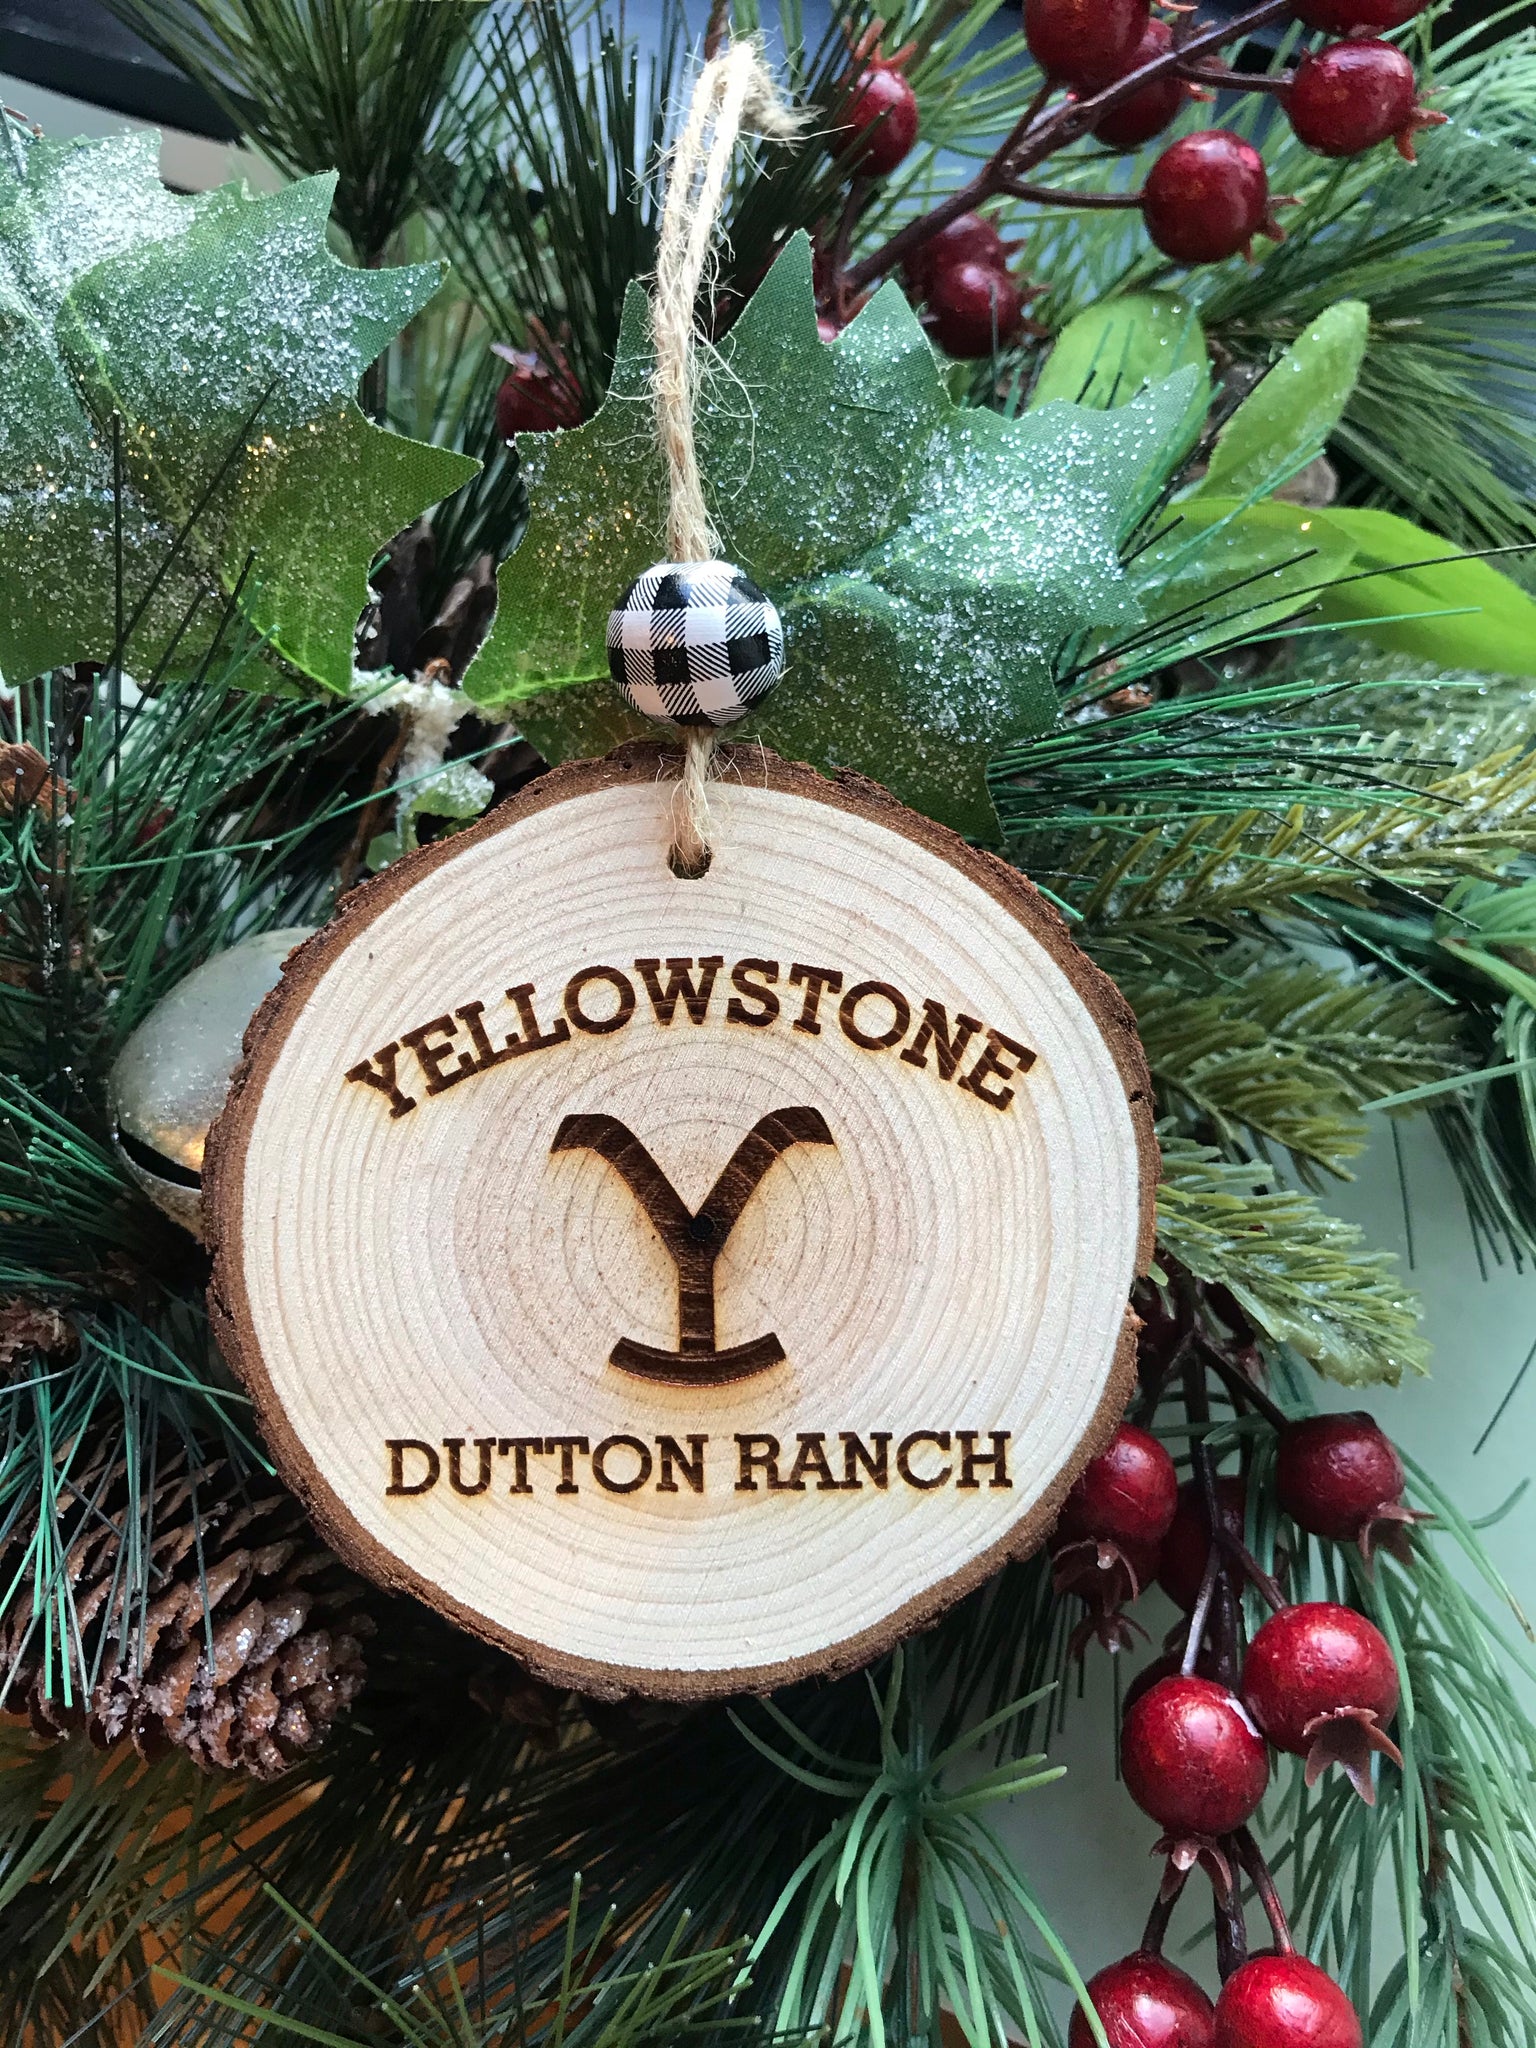 Yellowstone Dutton Ranch logo Engraved Wood Slice Ornament